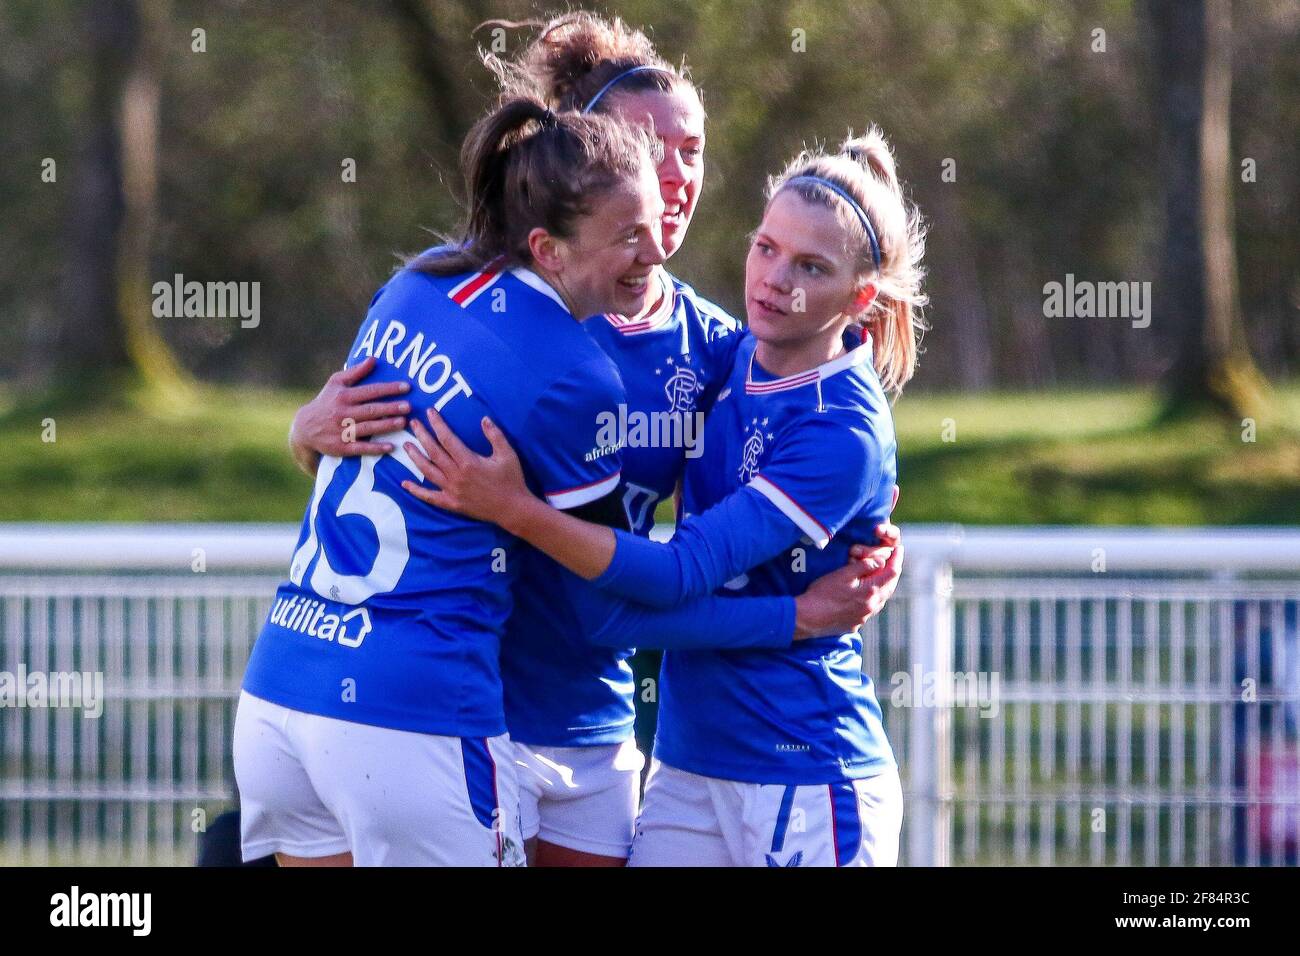 Glasgow, UK. 11th Apr, 2021. GOAL! Lizzie Arnot (#15) of Rangers Women FC celebrates with team mates Brogan Hay (#7) & Nicola Docherty (#2) during the Scottish Building Society SWPL1 Fixture Rangers FC vs Spartans FC at Rangers Training Centre, Glasgow, 11/04/2021 | Images courtesy of www.collargeimages.co.uk Credit: Colin Poultney/Alamy Live News Stock Photo